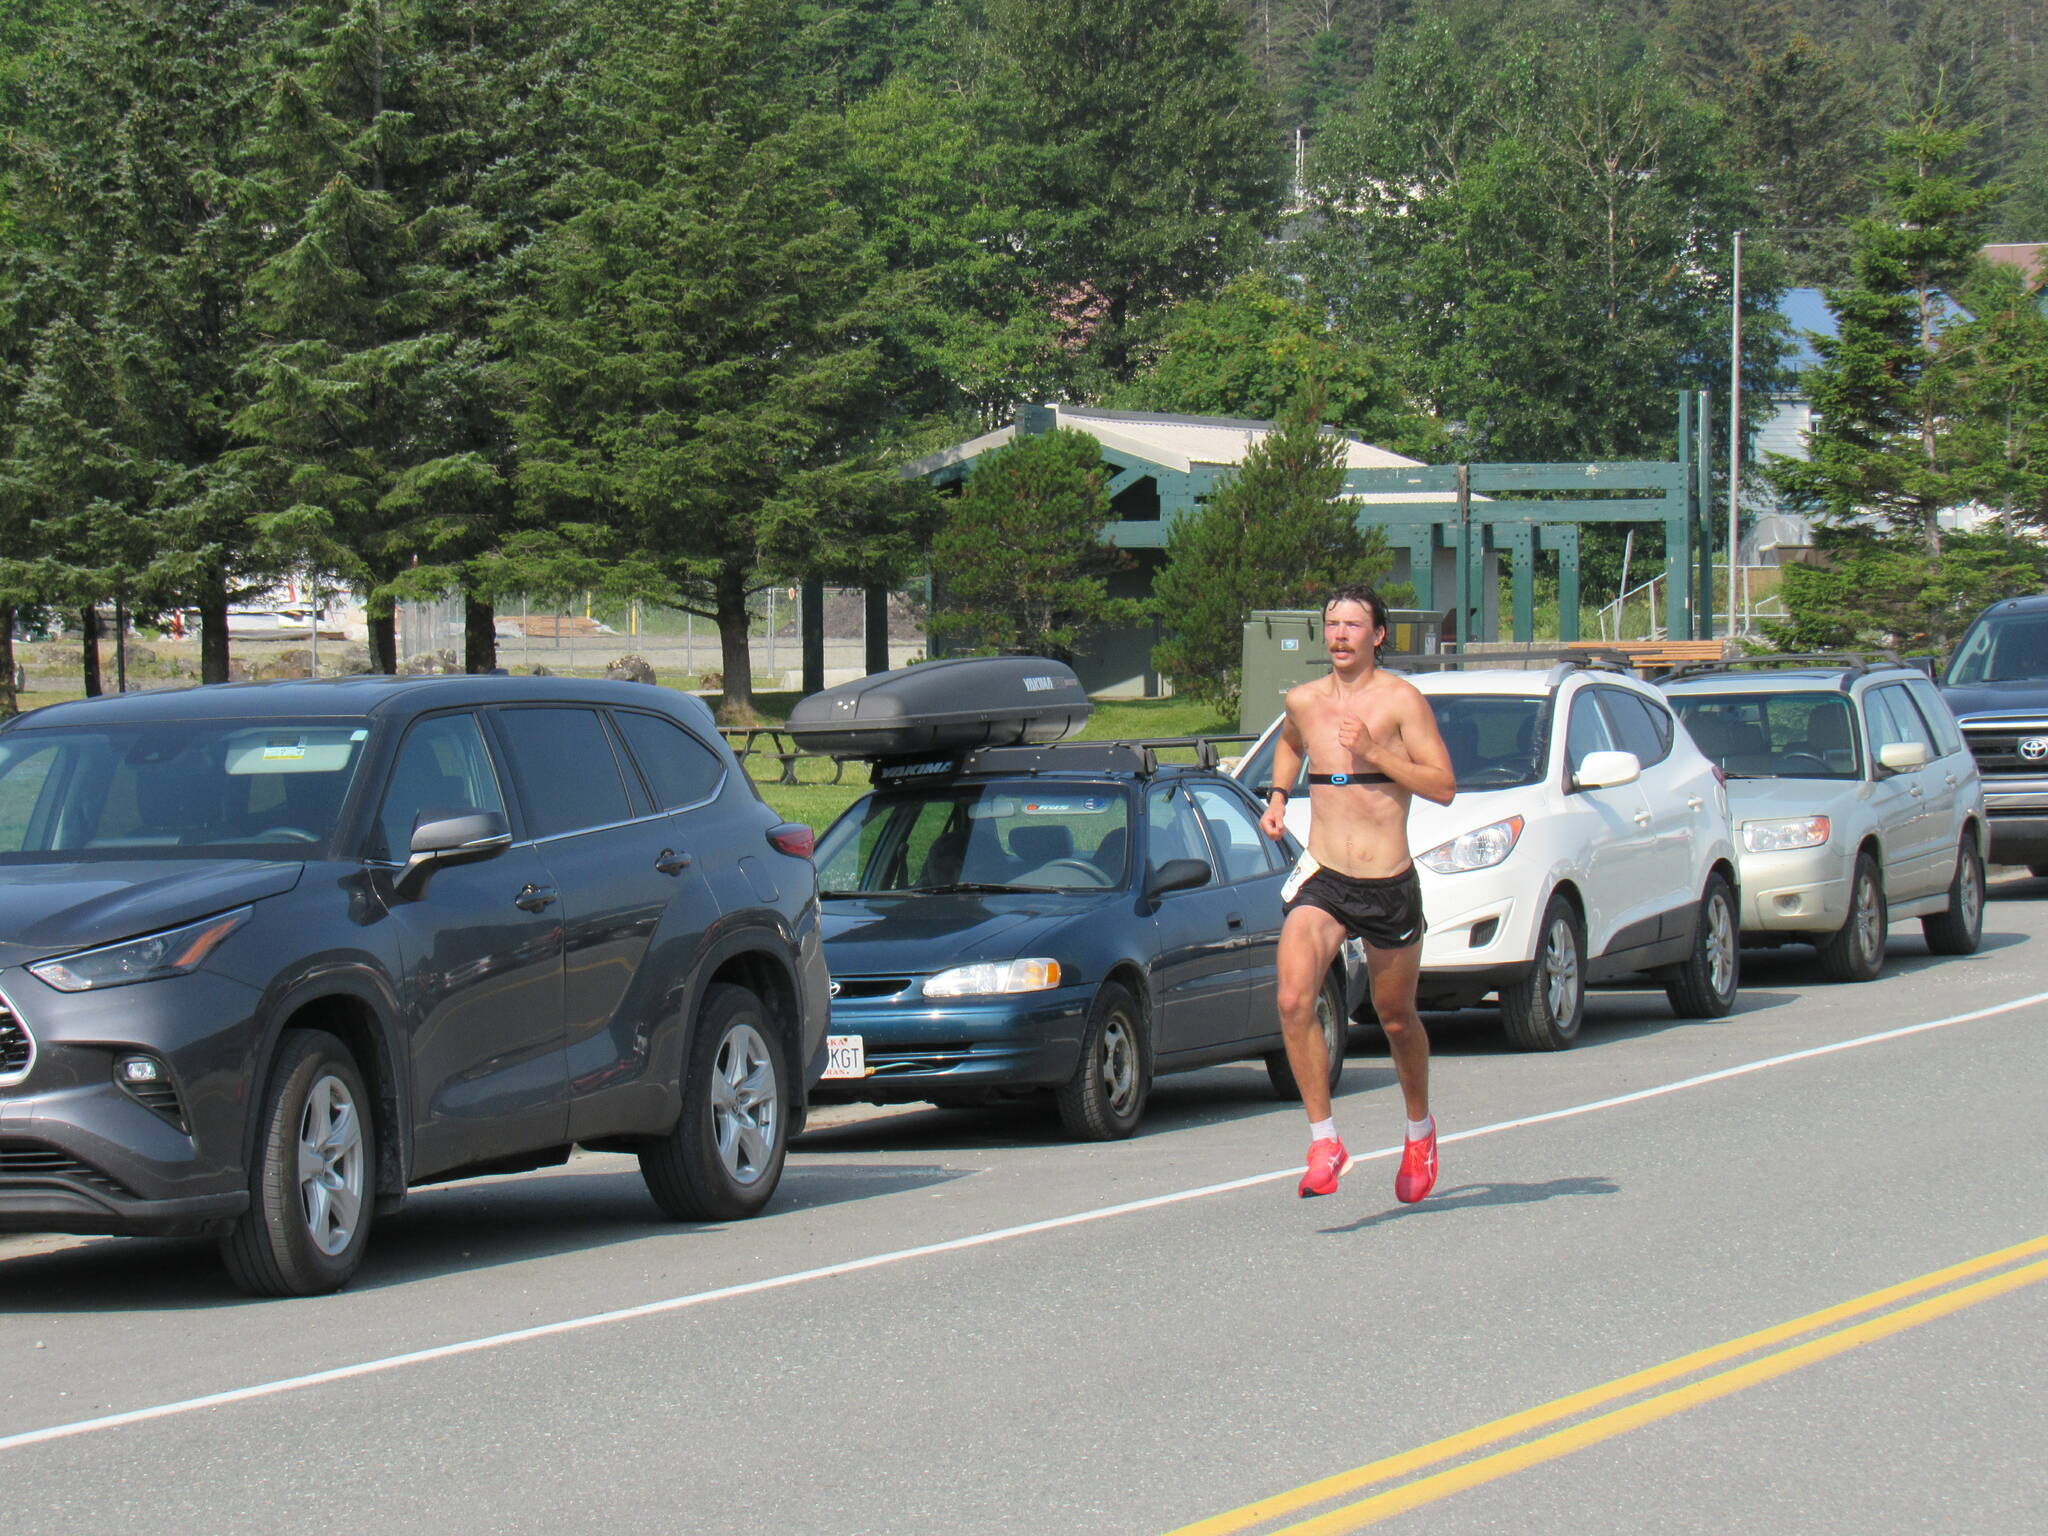 Zack Bursell of Juneau nears the finish line of the Juneau Half Marathon on Saturday at Savikko Park. He finished second in the race with a time of 1 hour, 15 minutes, 46 seconds. (Photo courtesy of Juneau Trail and Road Runners)